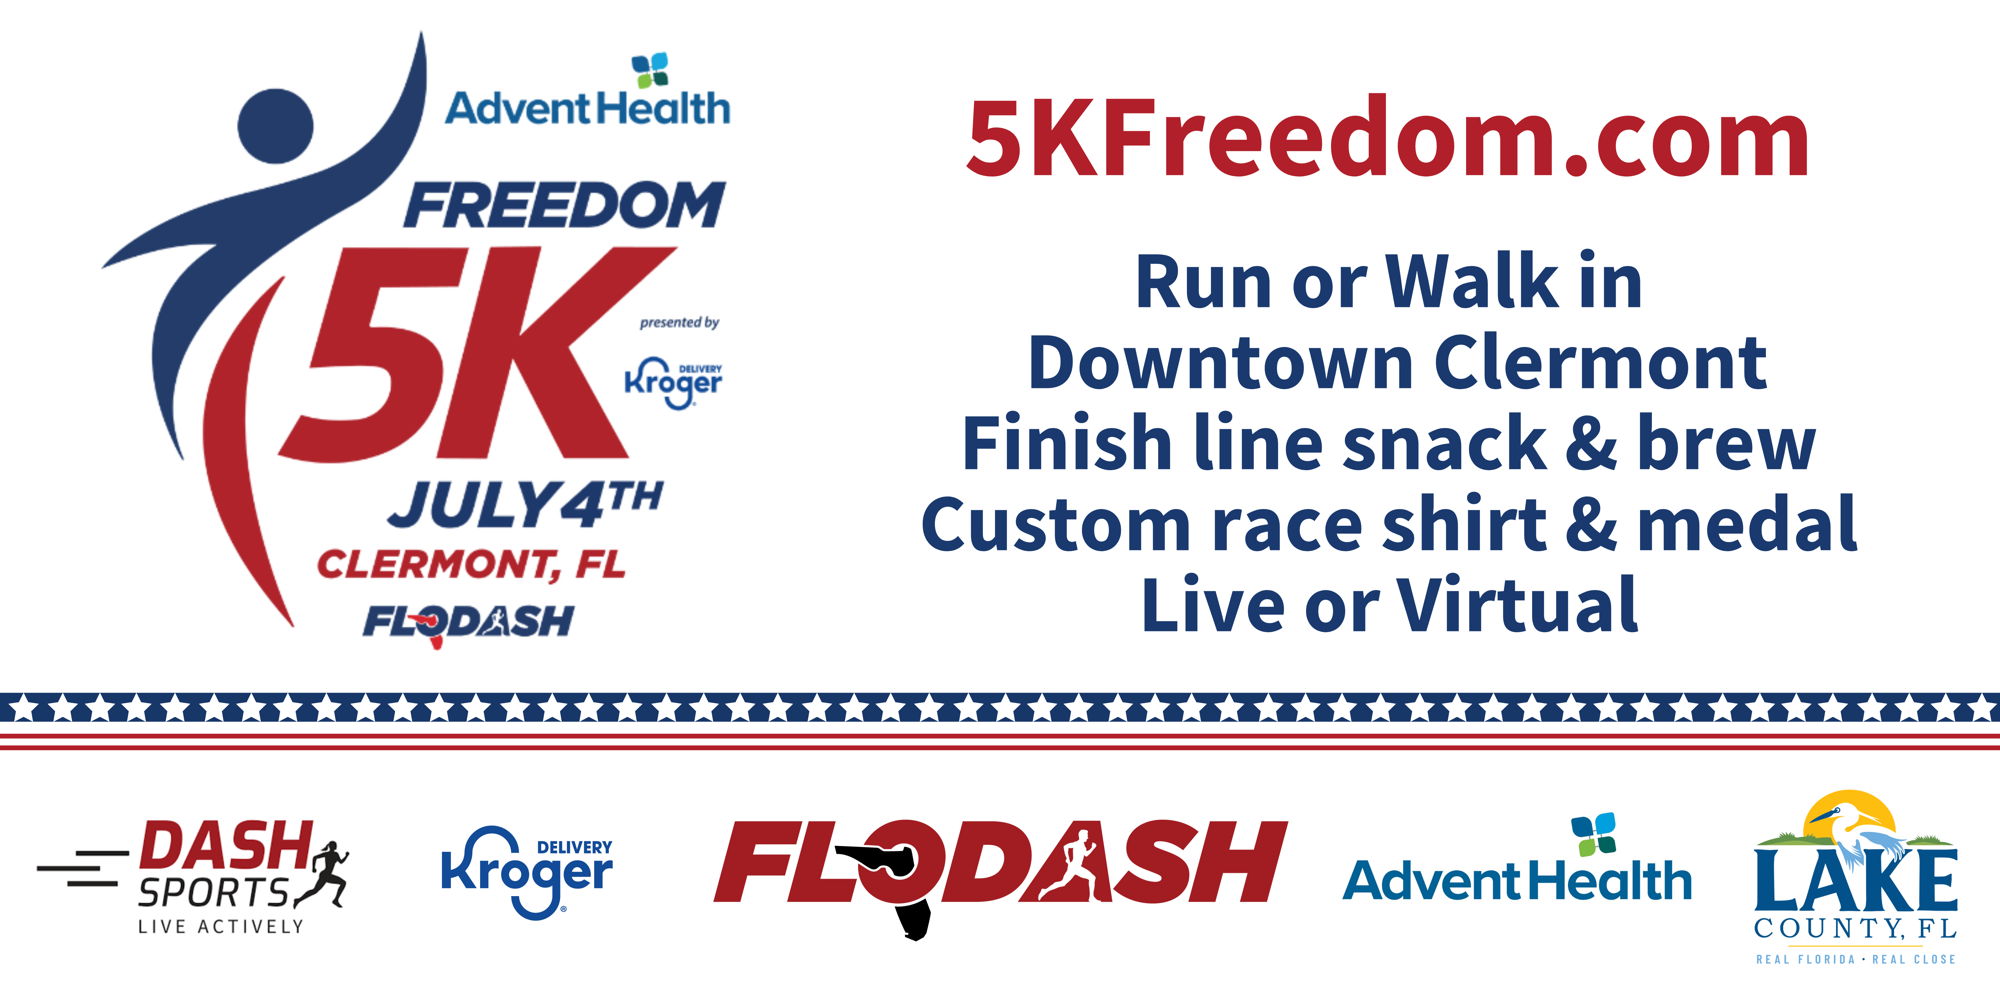 AdventHealth Clermont Freedom 5K presented by Kroger Delivery promotional image